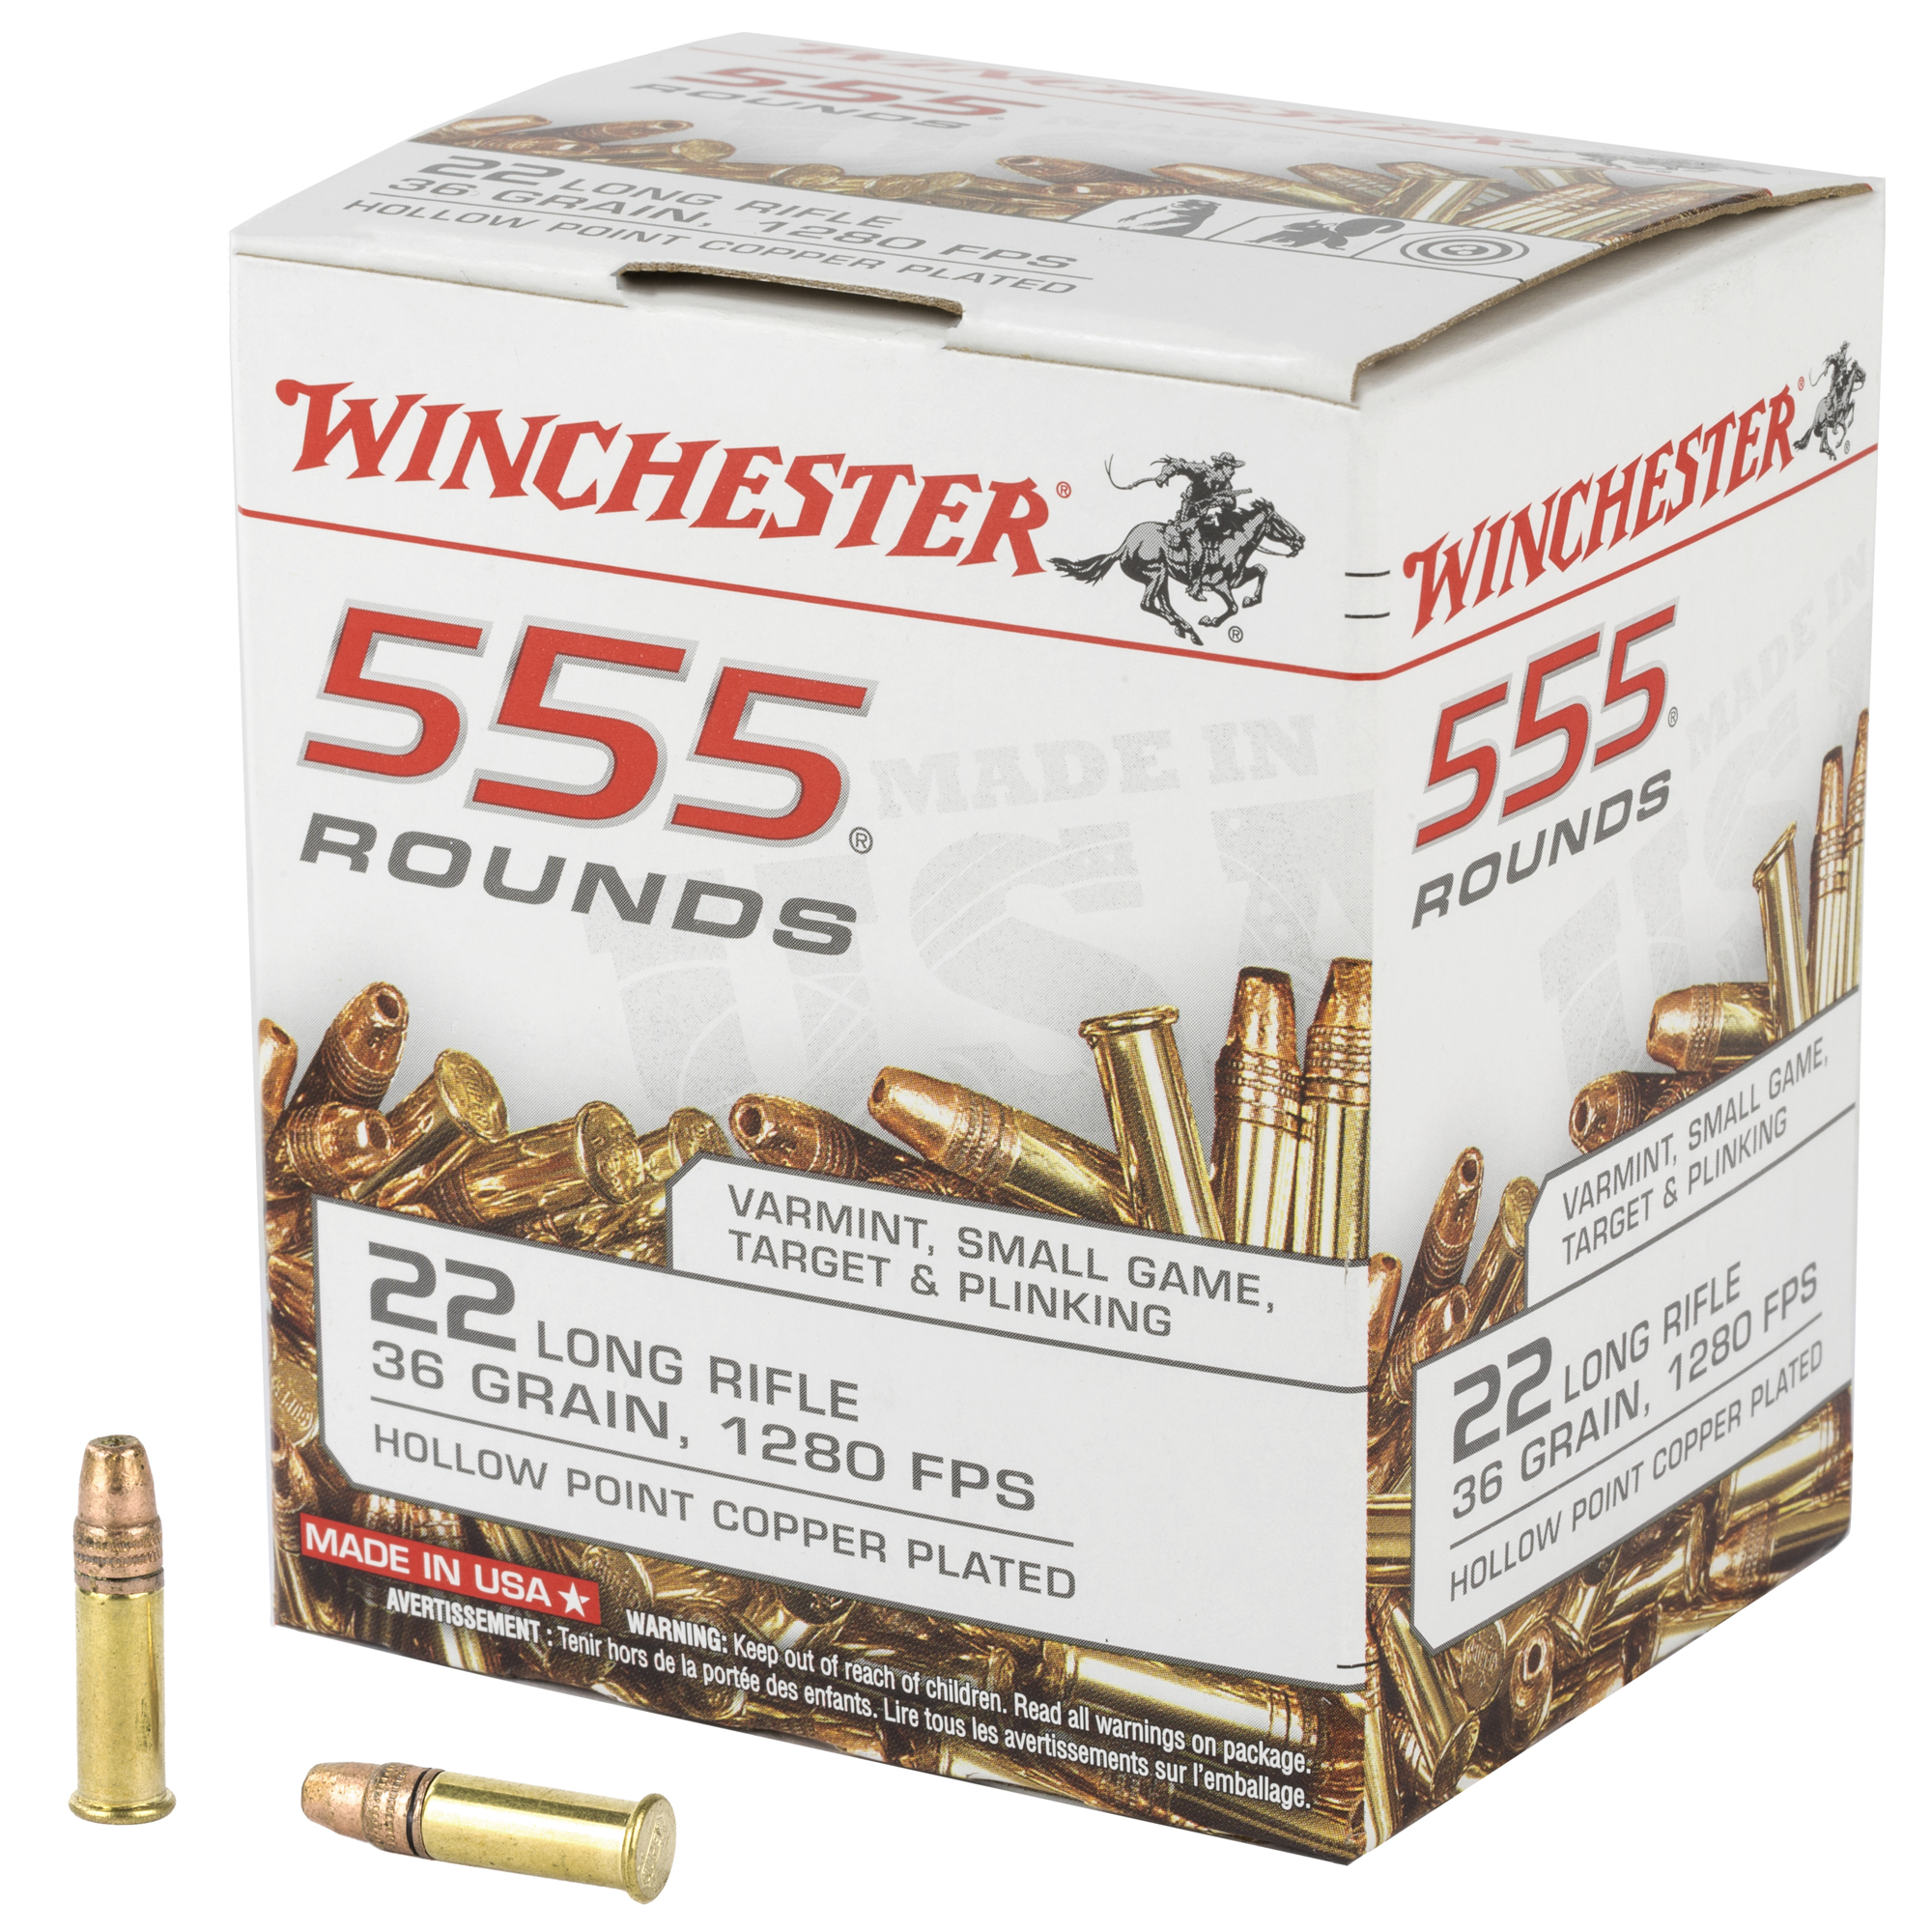 Winchester .22LR Ammunition 36gr Copper Plated Hollow Point (555 Rounds)